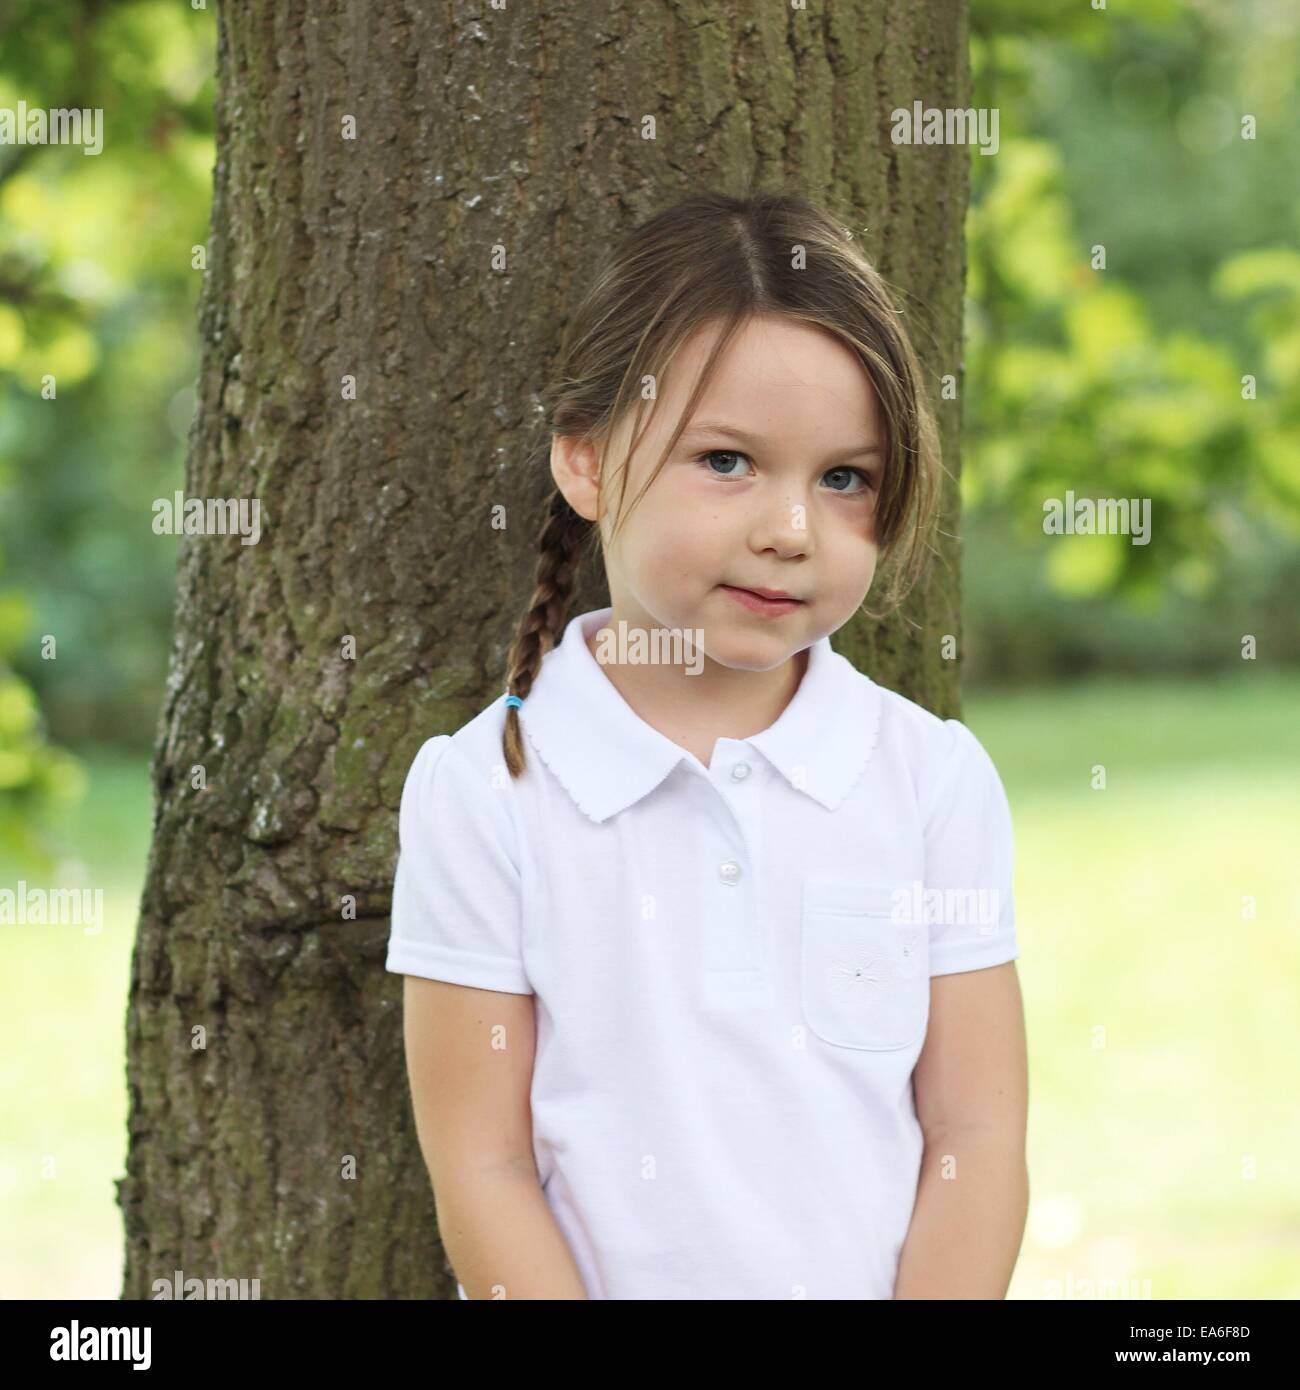 Portrait of a Girl standing by tree Banque D'Images